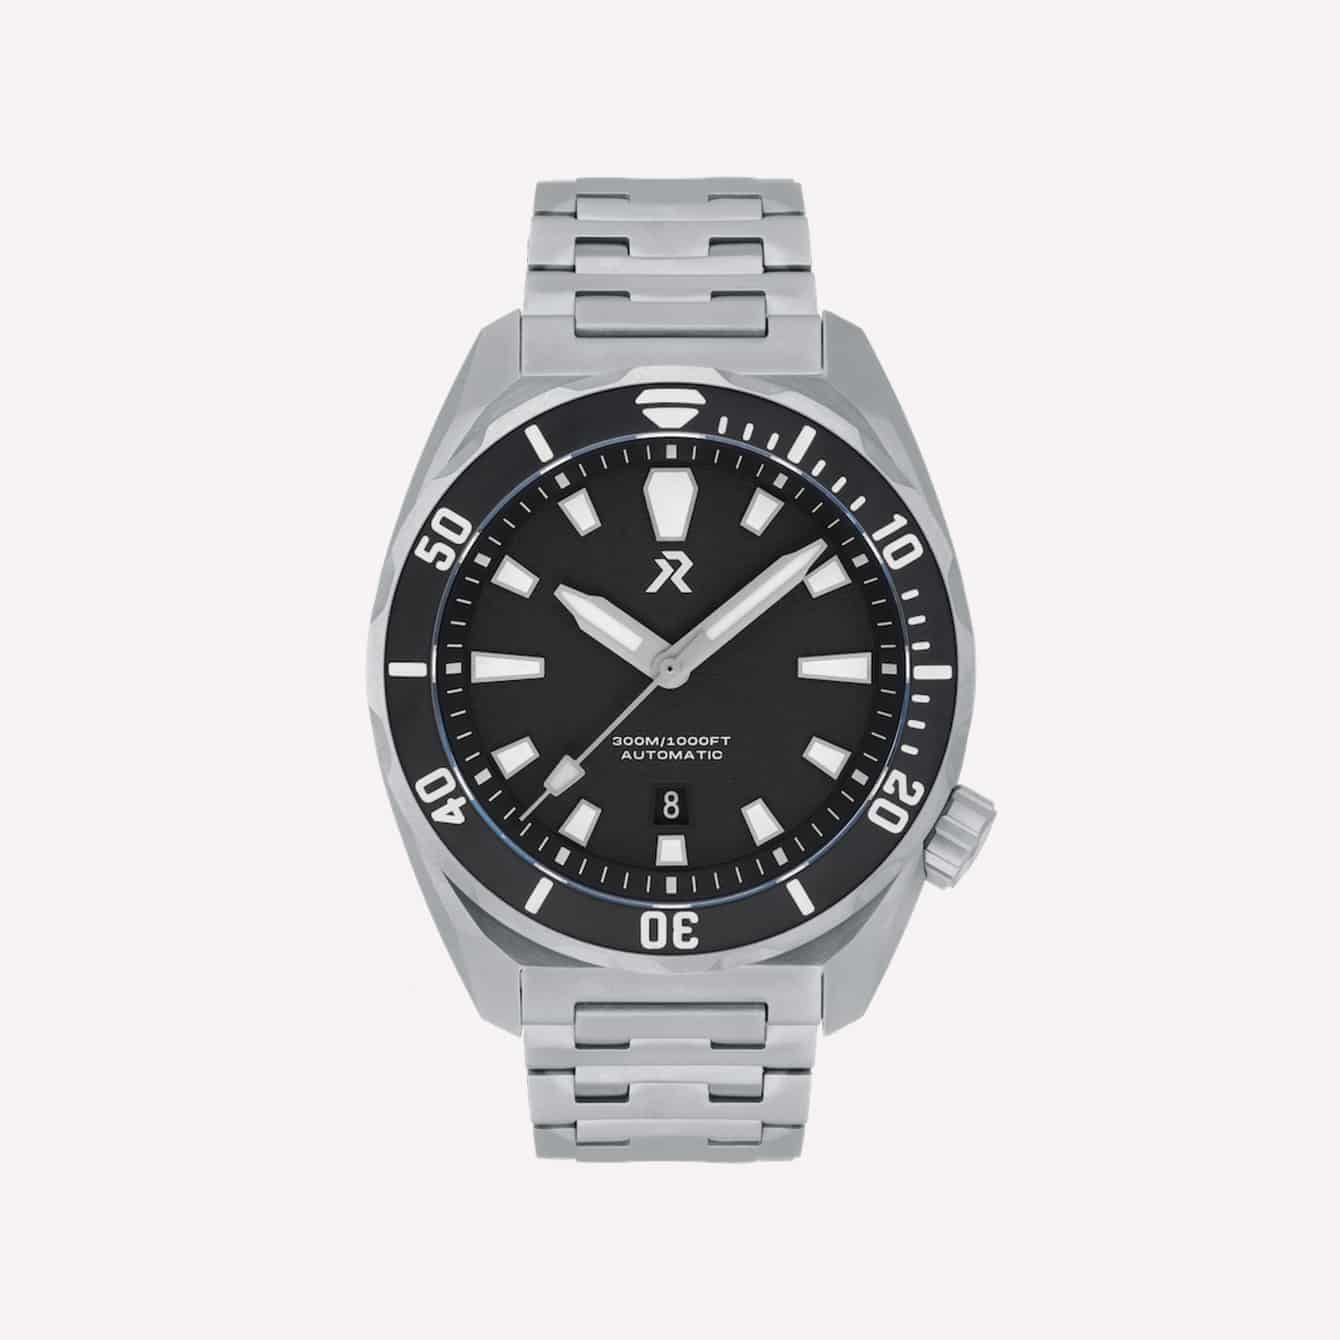 Micro Watch Brands: What They Are and Which Are Worth Your Time-3